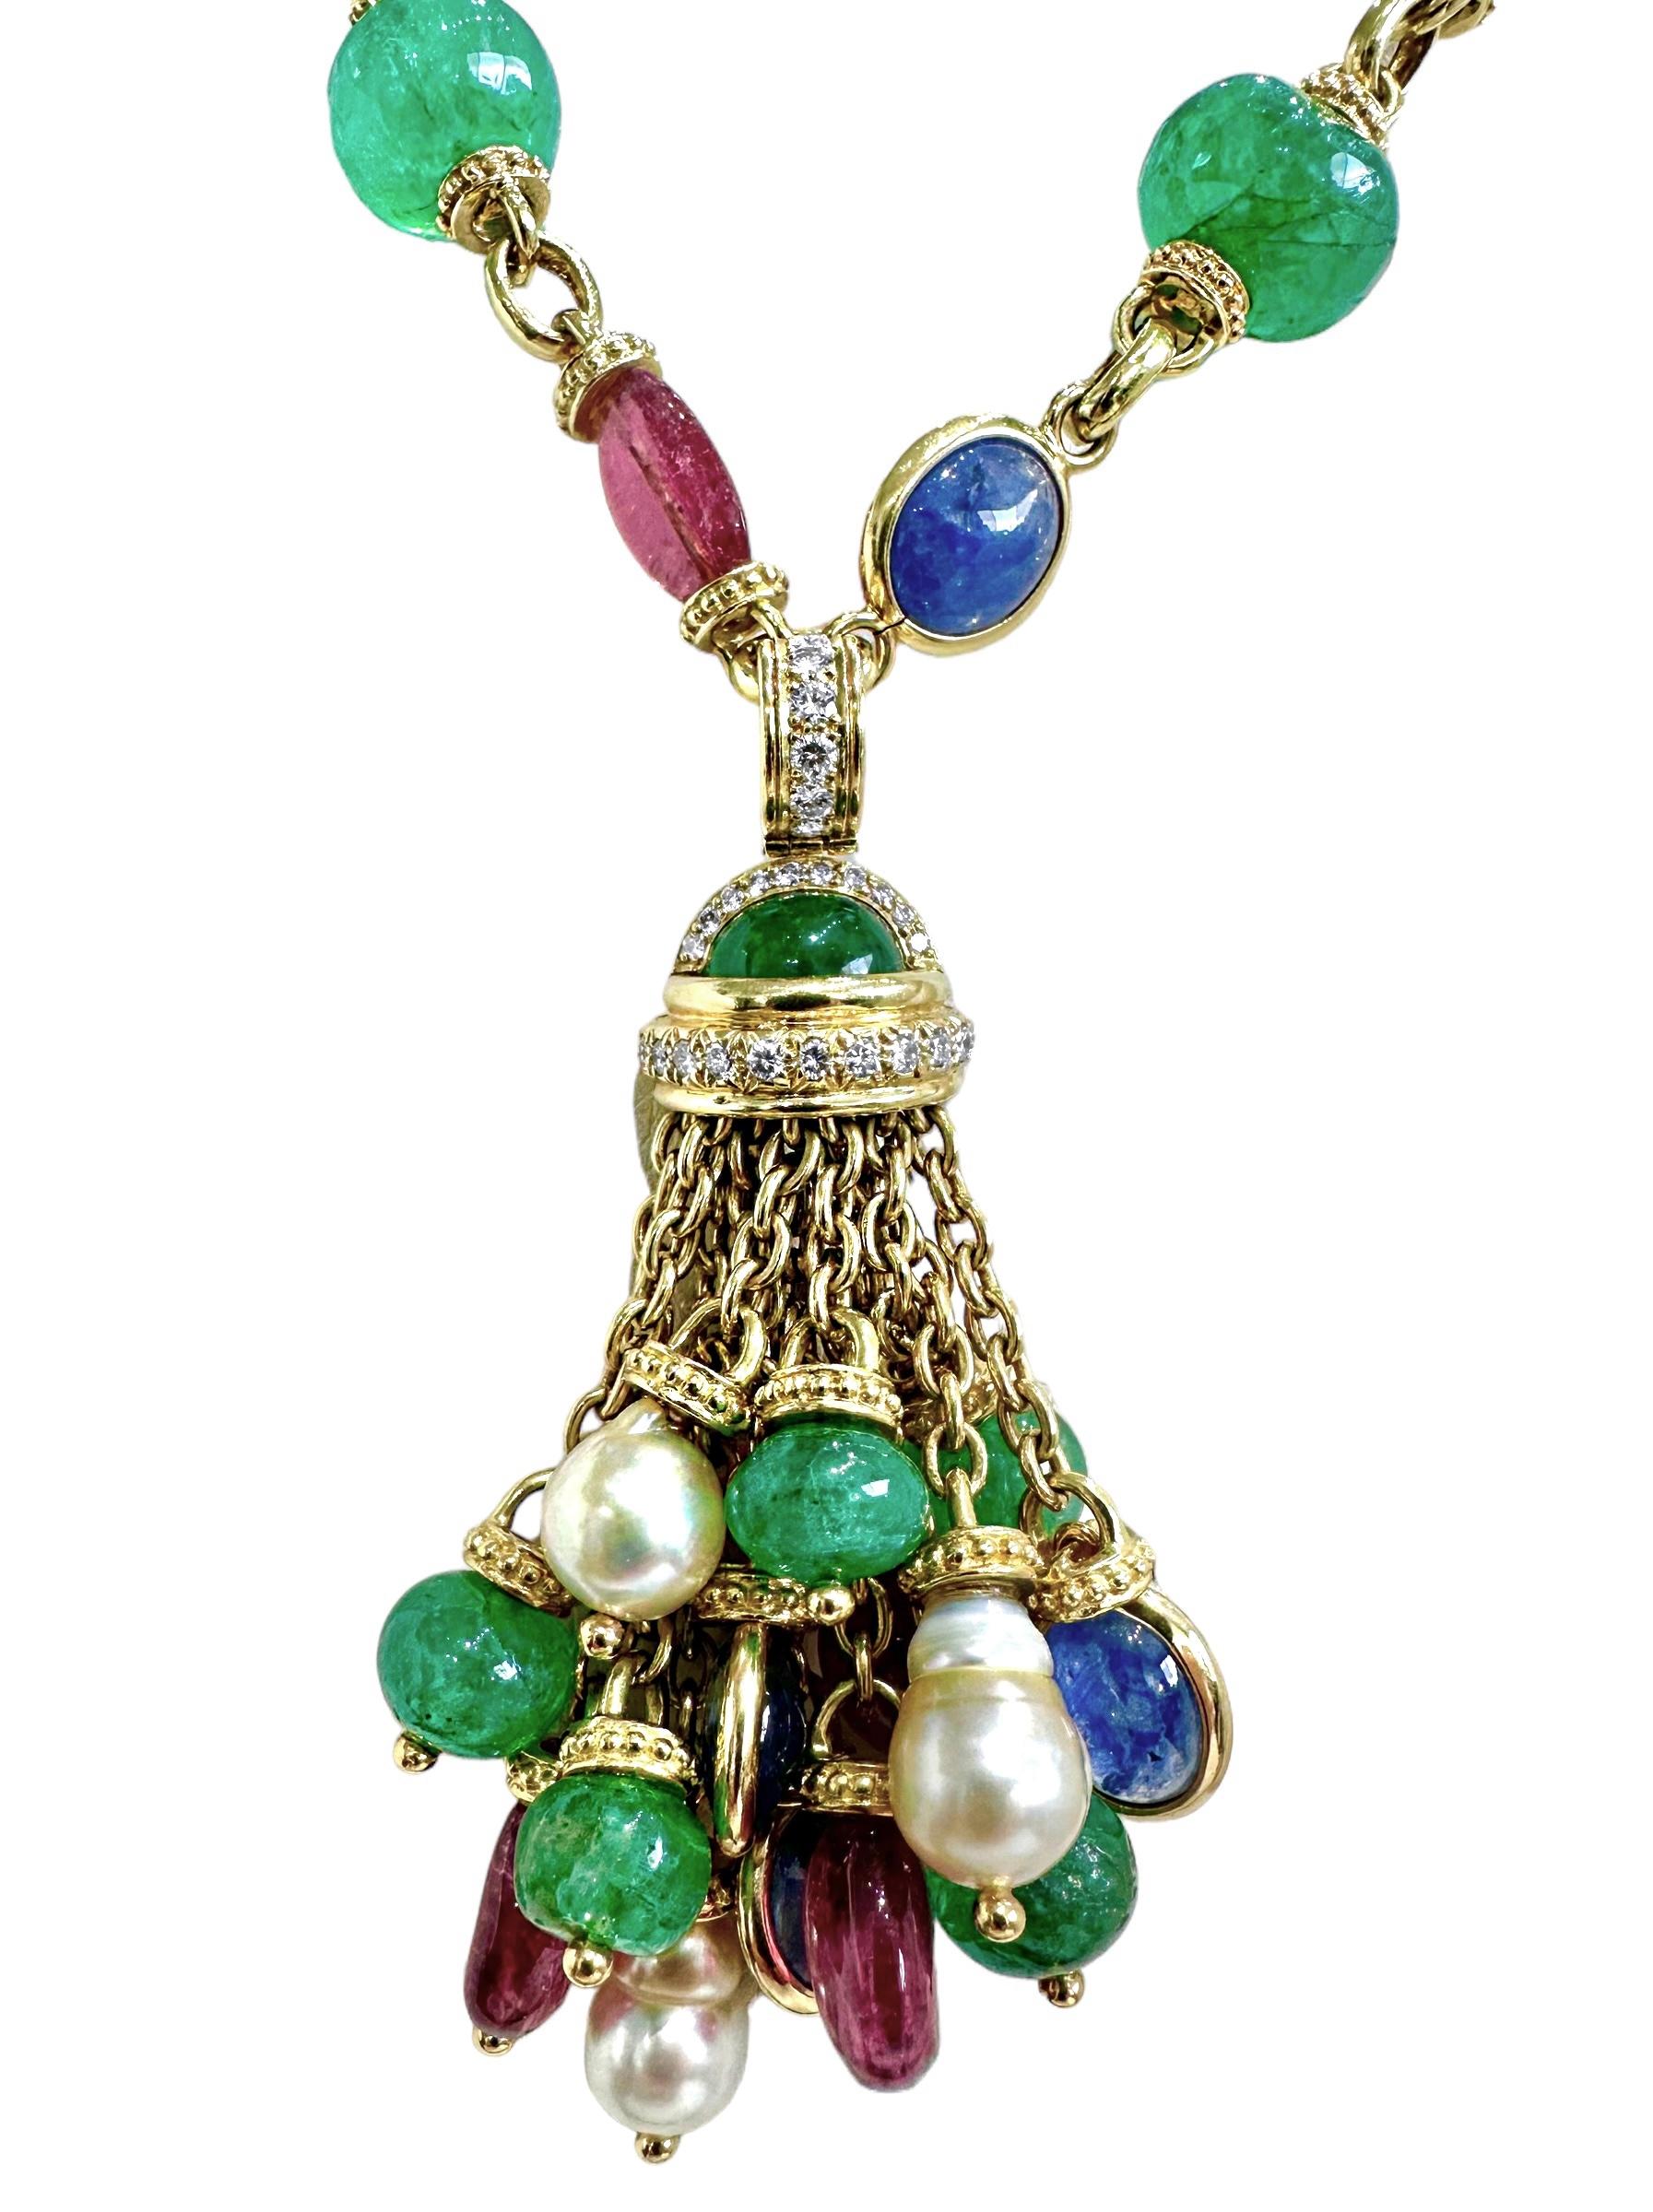 Bead Vintage 40 Inch Long Gold, Diamond & Multicolor Stone Necklace by Tambetti For Sale